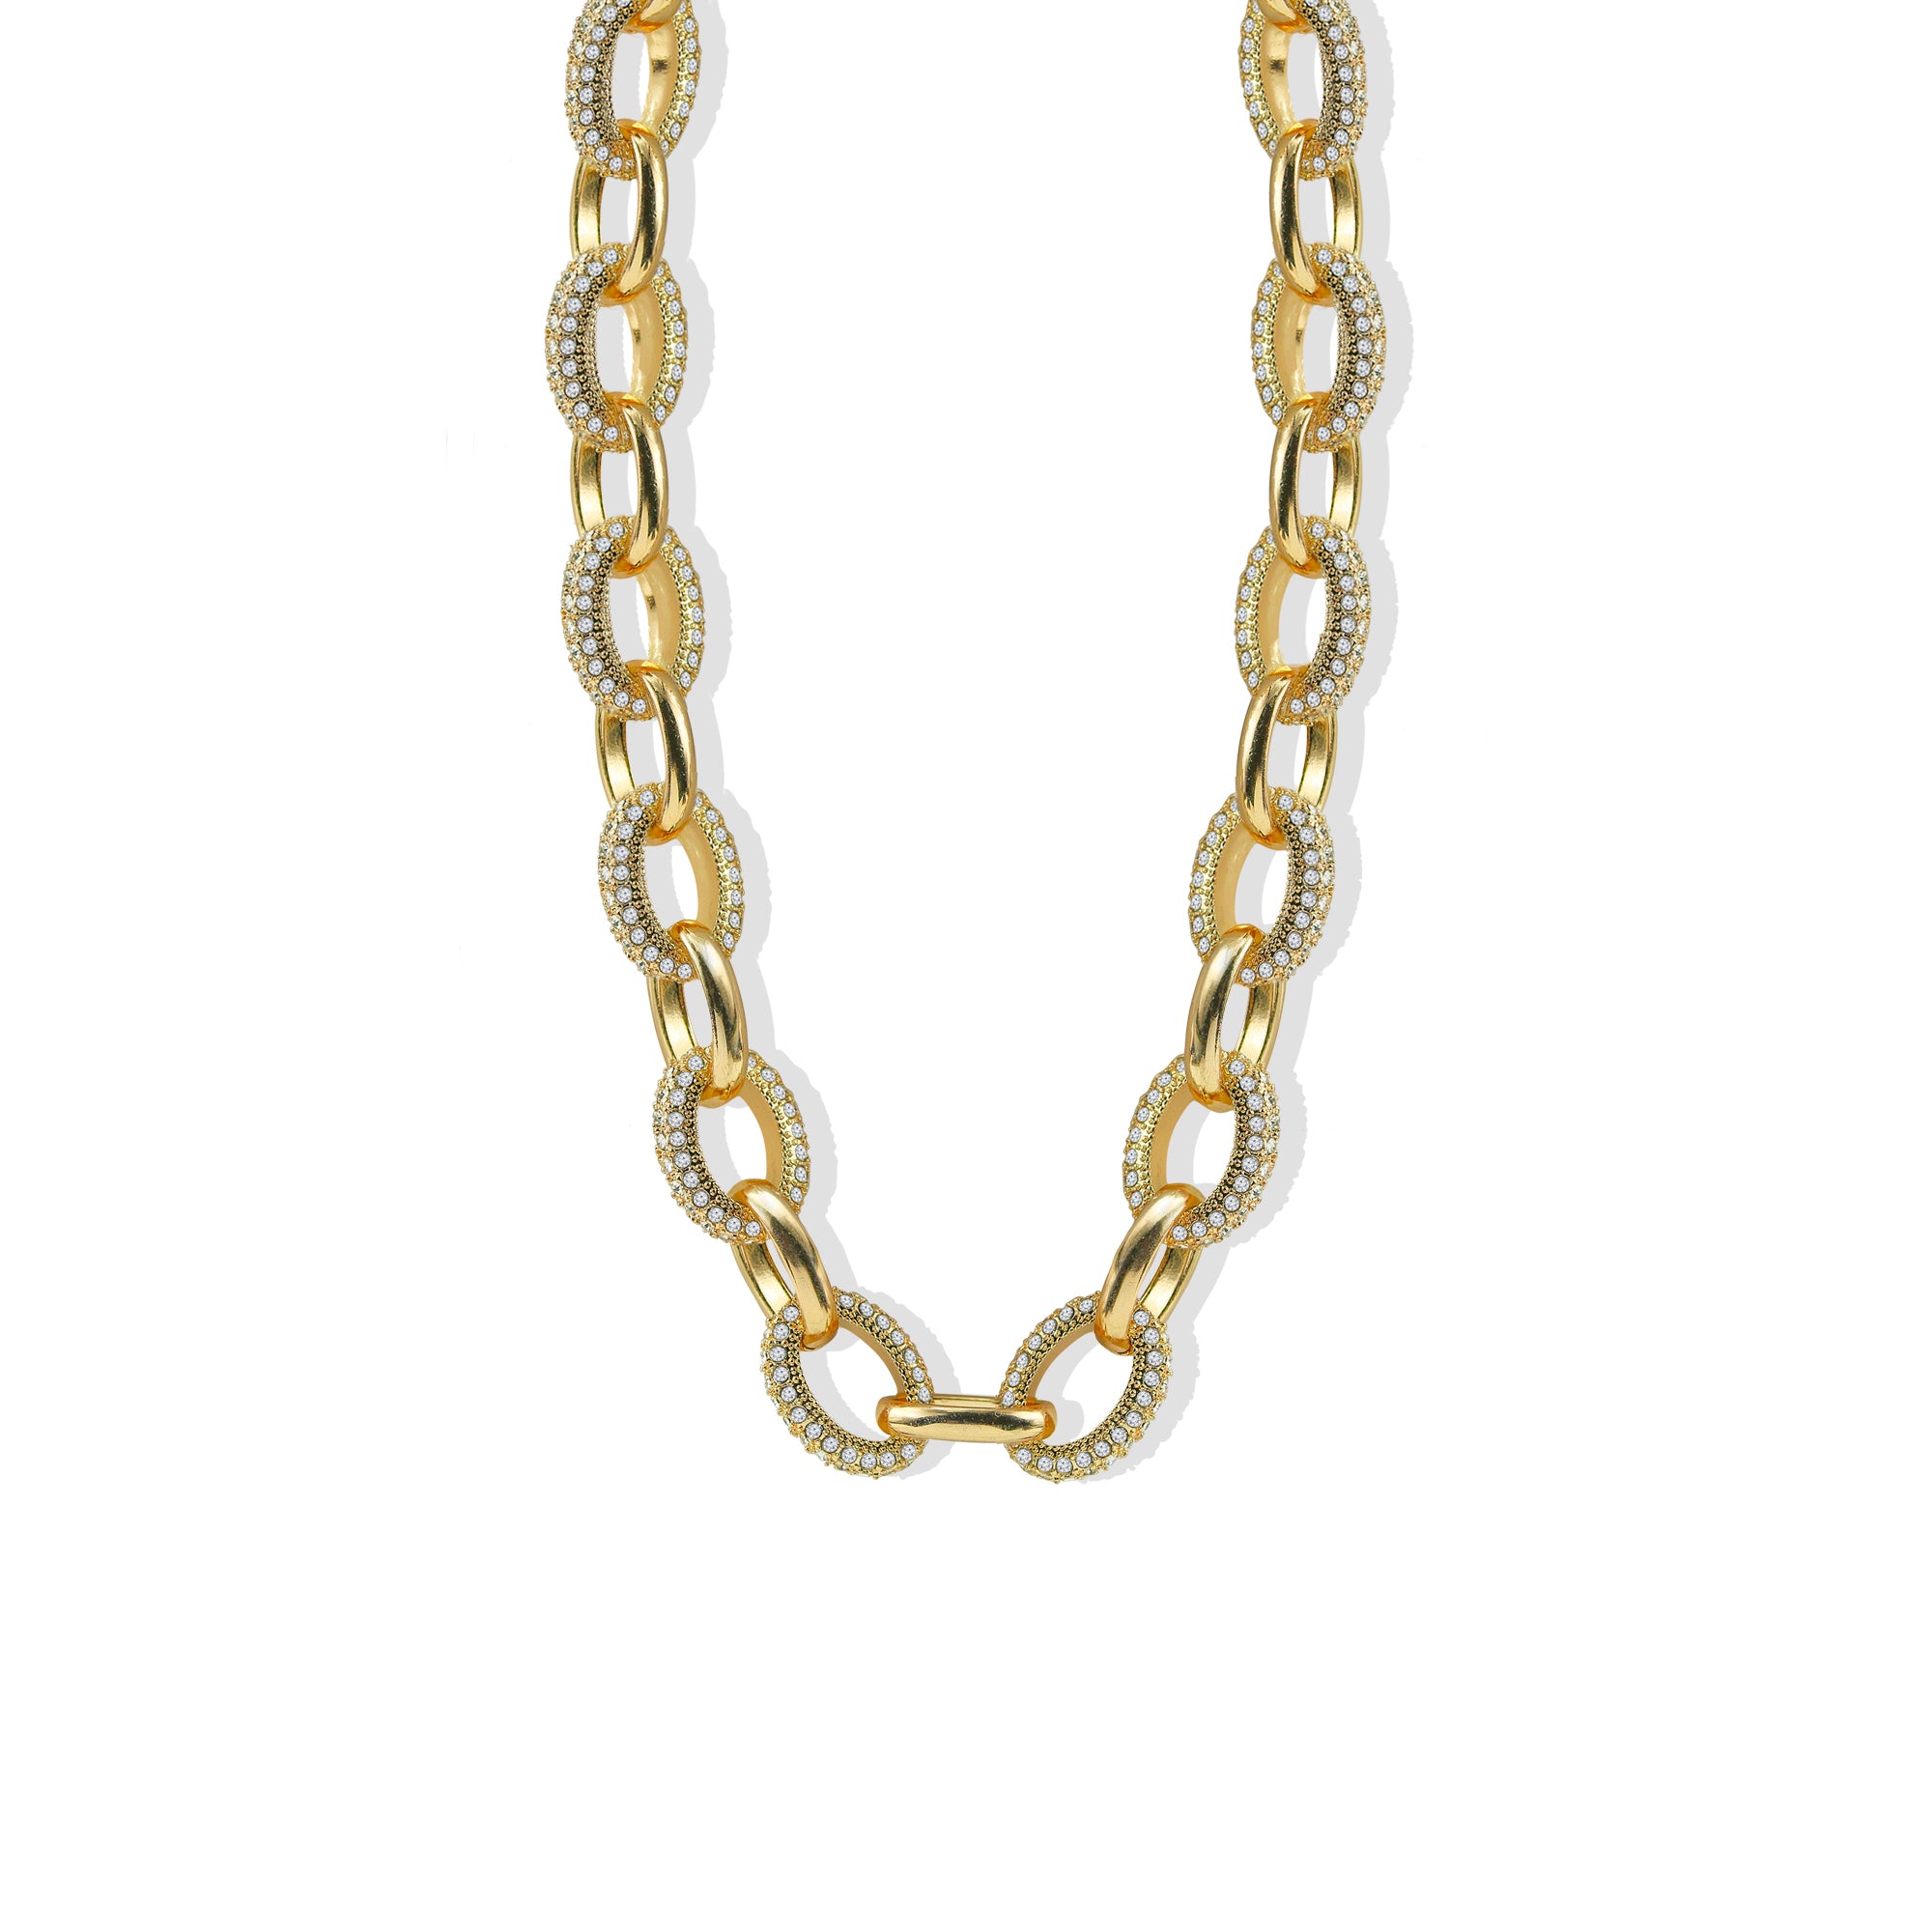 THE ANTOINETTE CHAIN NECKLACE